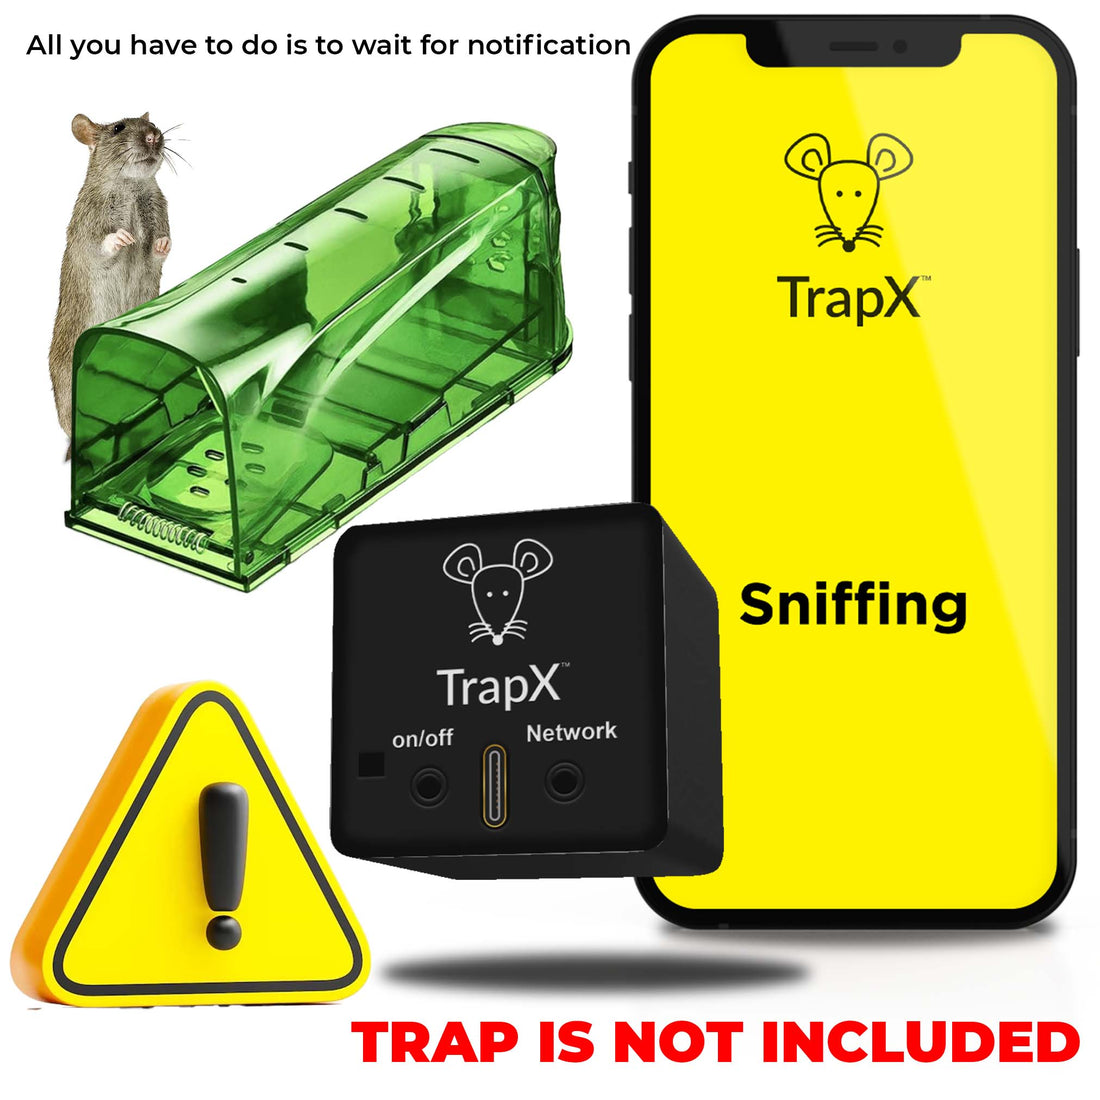 what is the best thing to put on a mouse trap